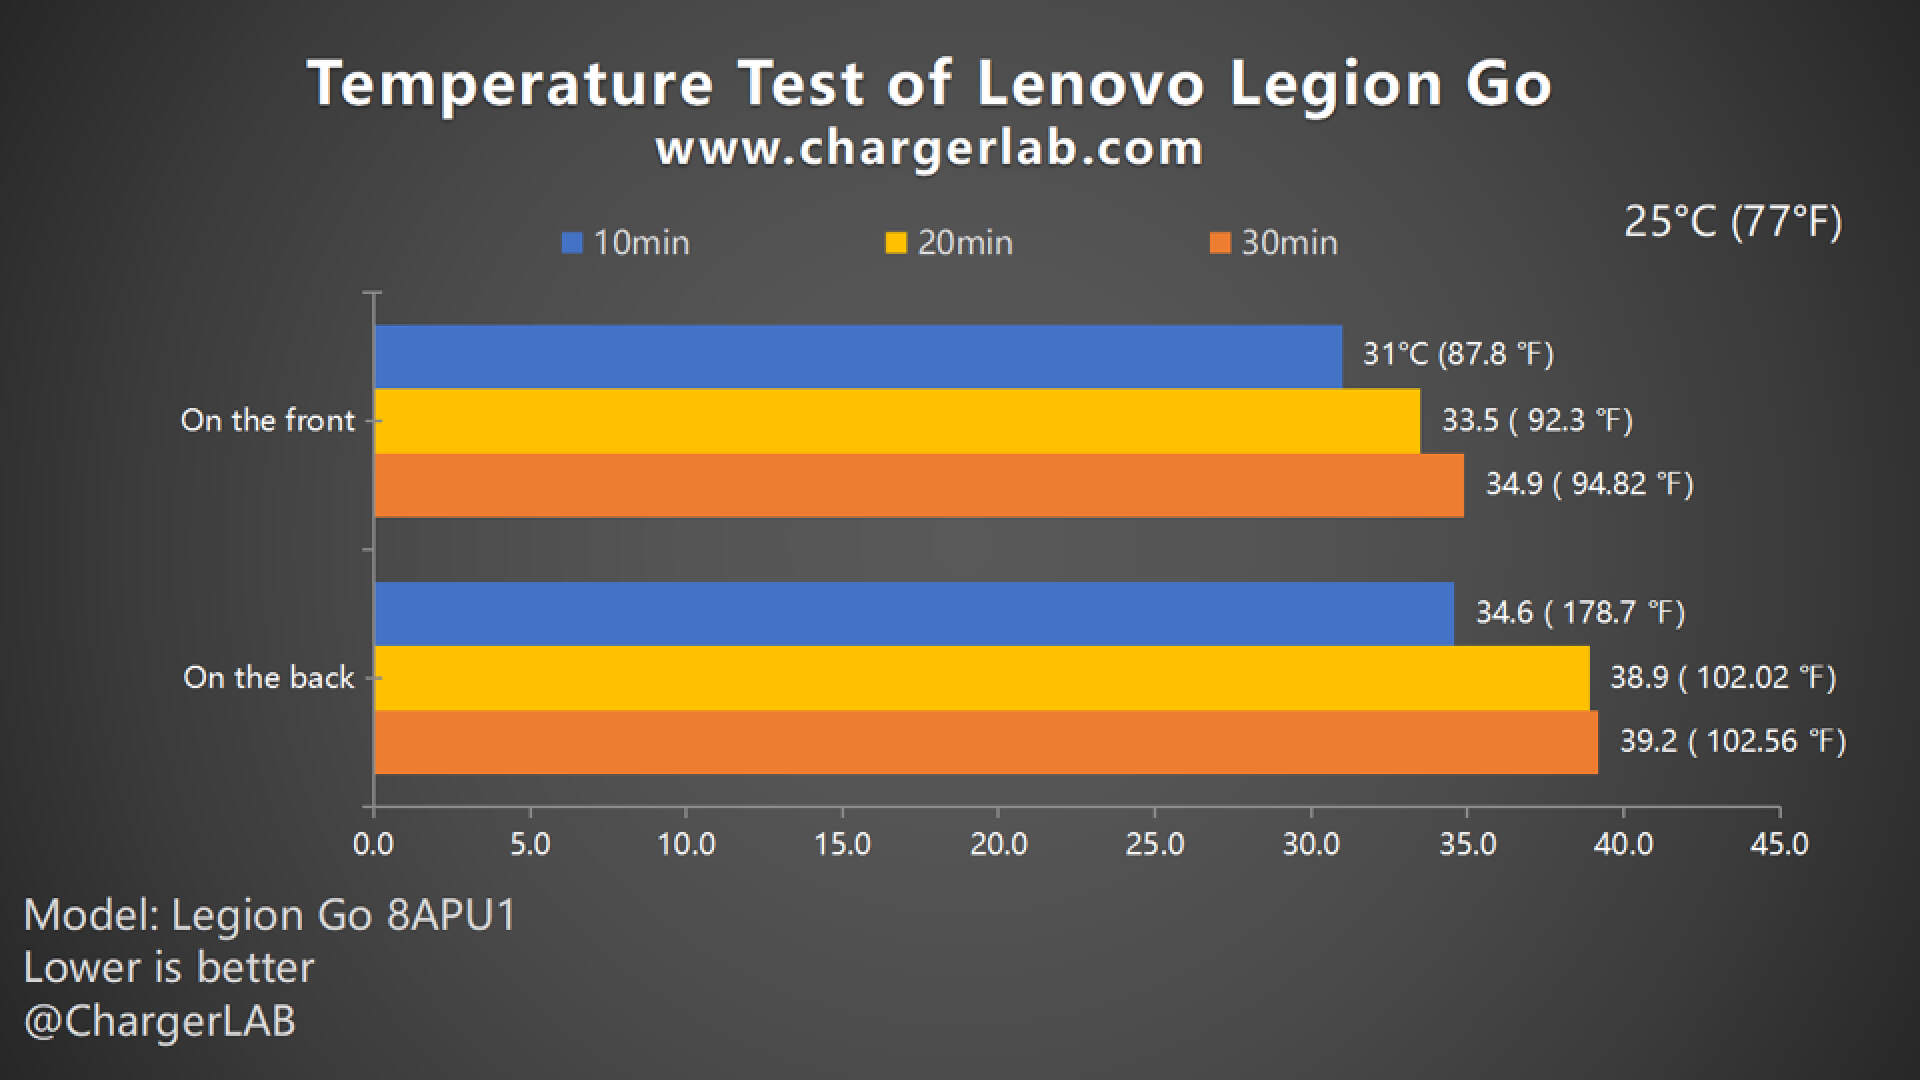 Charging Review of Lenovo Legion Go Handheld Gaming Console-Chargerlab